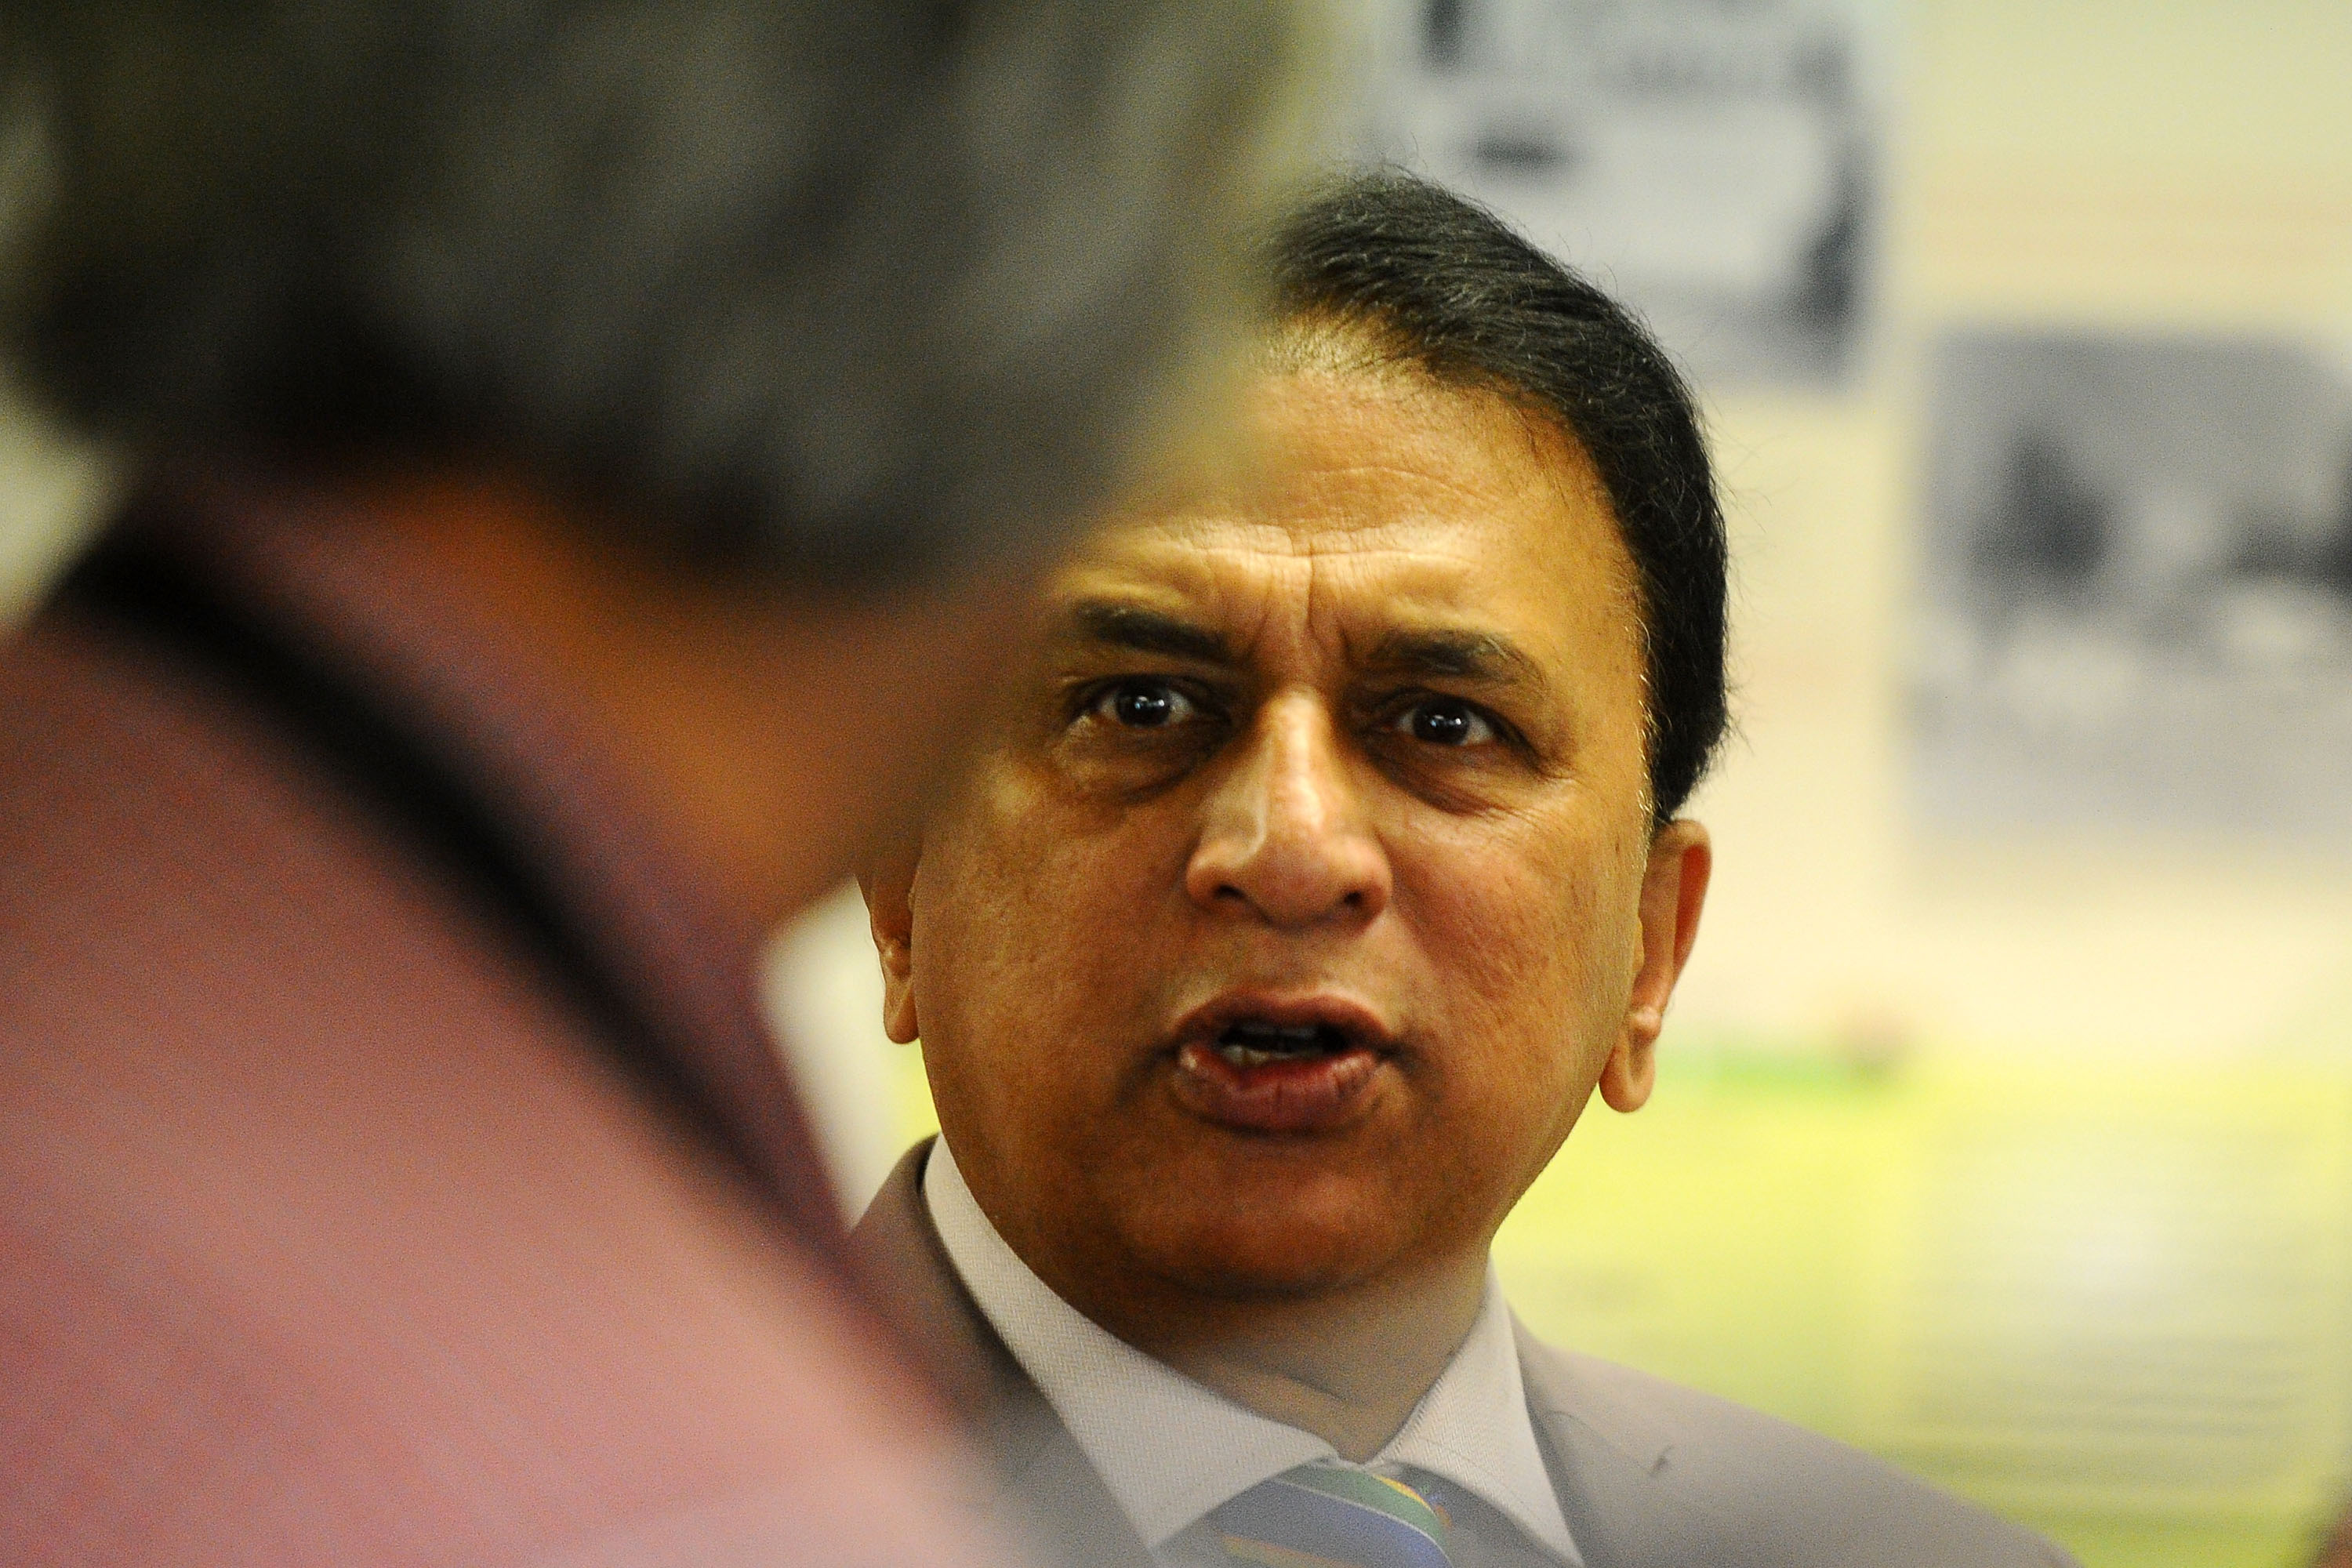 "If you want to win World Cup, you can’t drop catches" - Sunil Gavaskar warns India